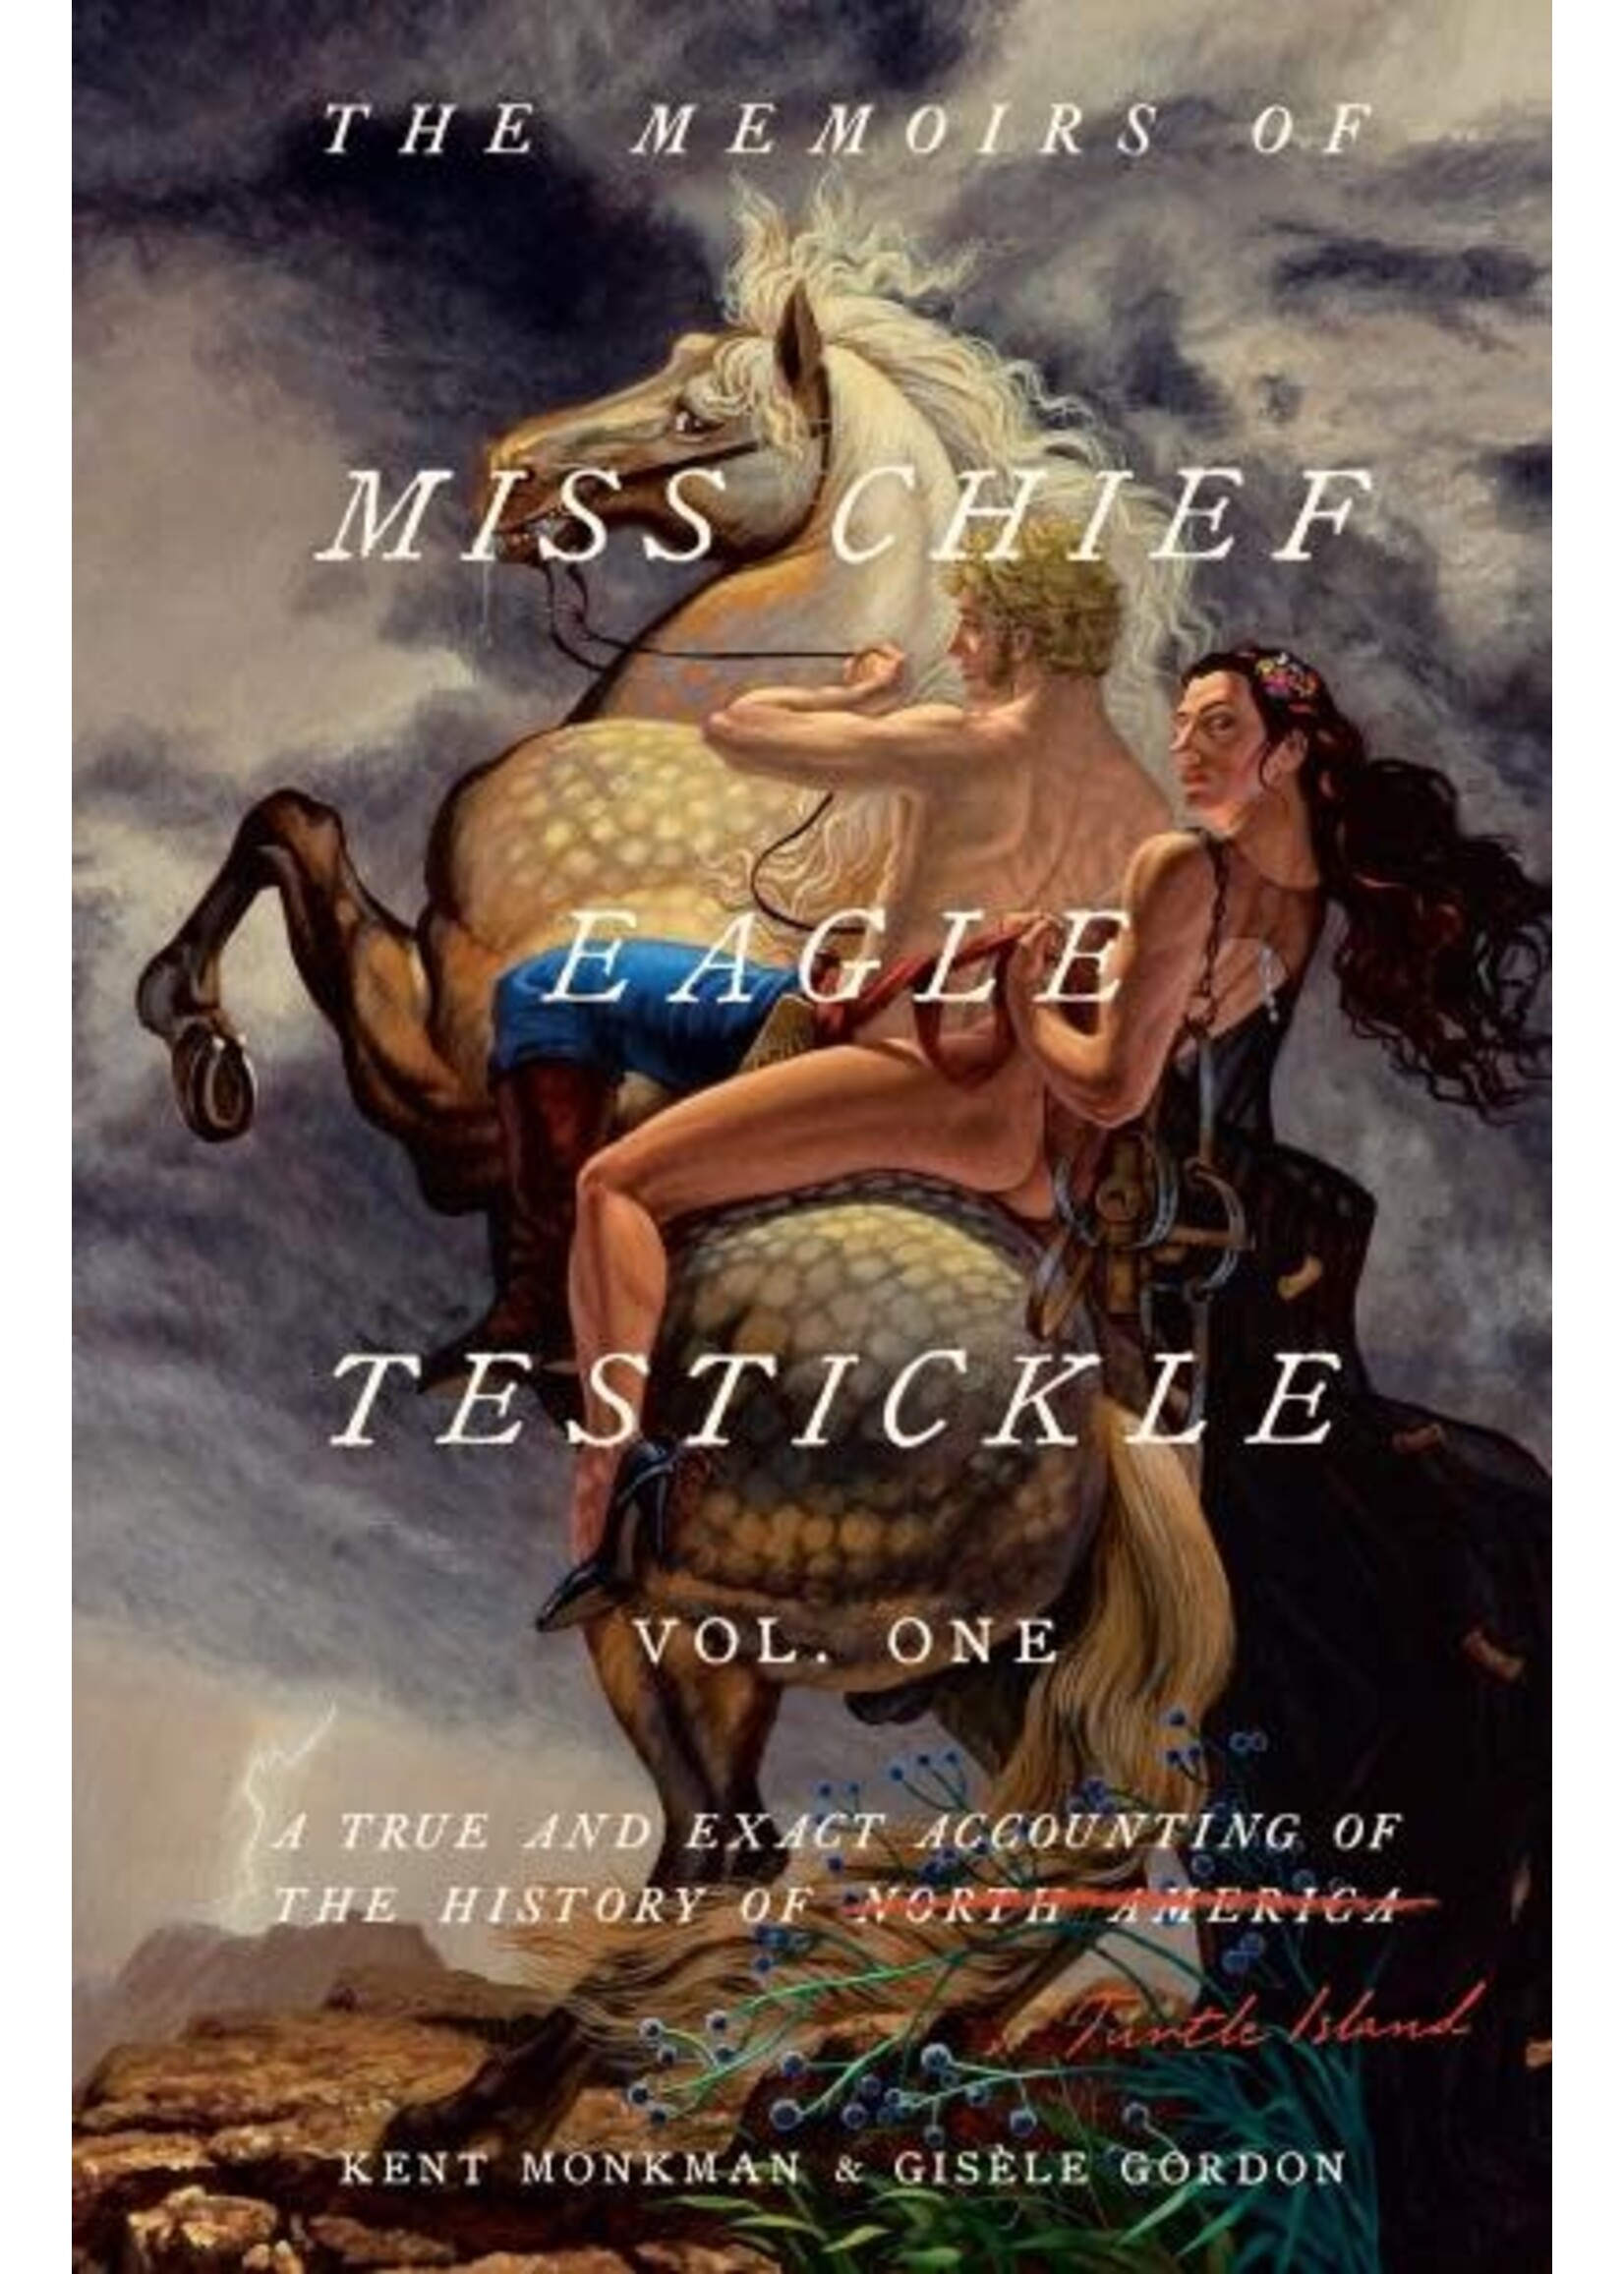 The Memoirs of Miss Chief Eagle Testickle, Vol. 1: A True and Exact Accounting of the History of Turtle Island by Kent Monkman, Gisèle Gordon